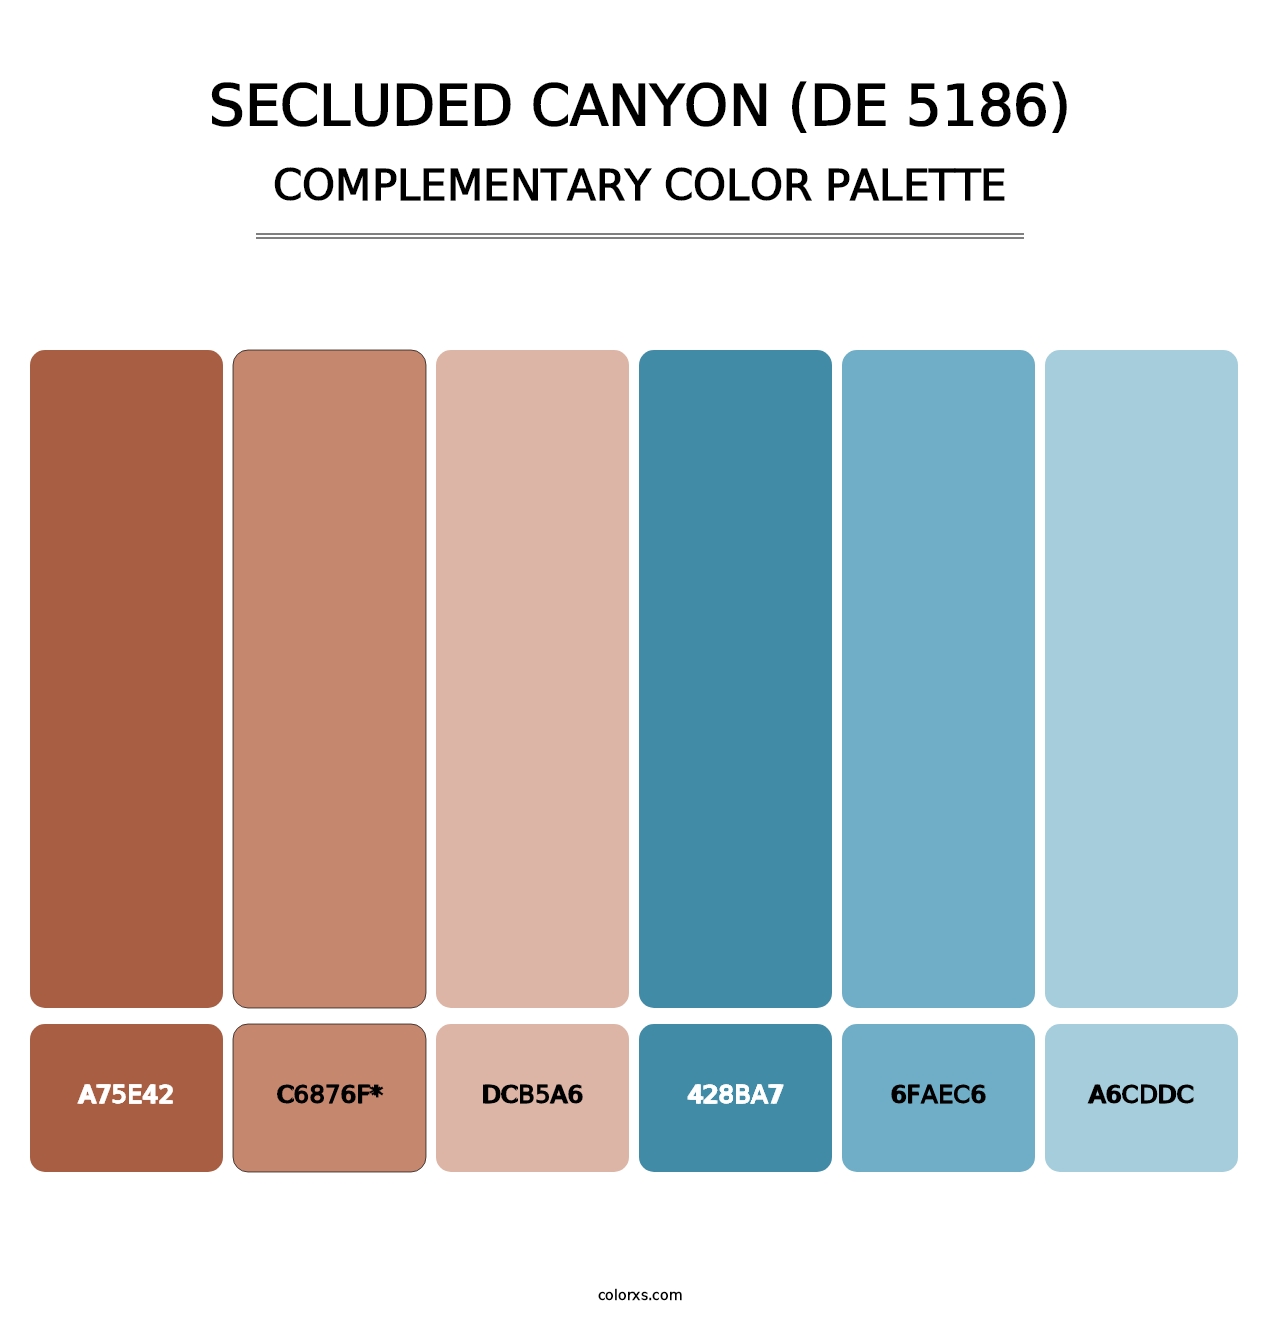 Secluded Canyon (DE 5186) - Complementary Color Palette